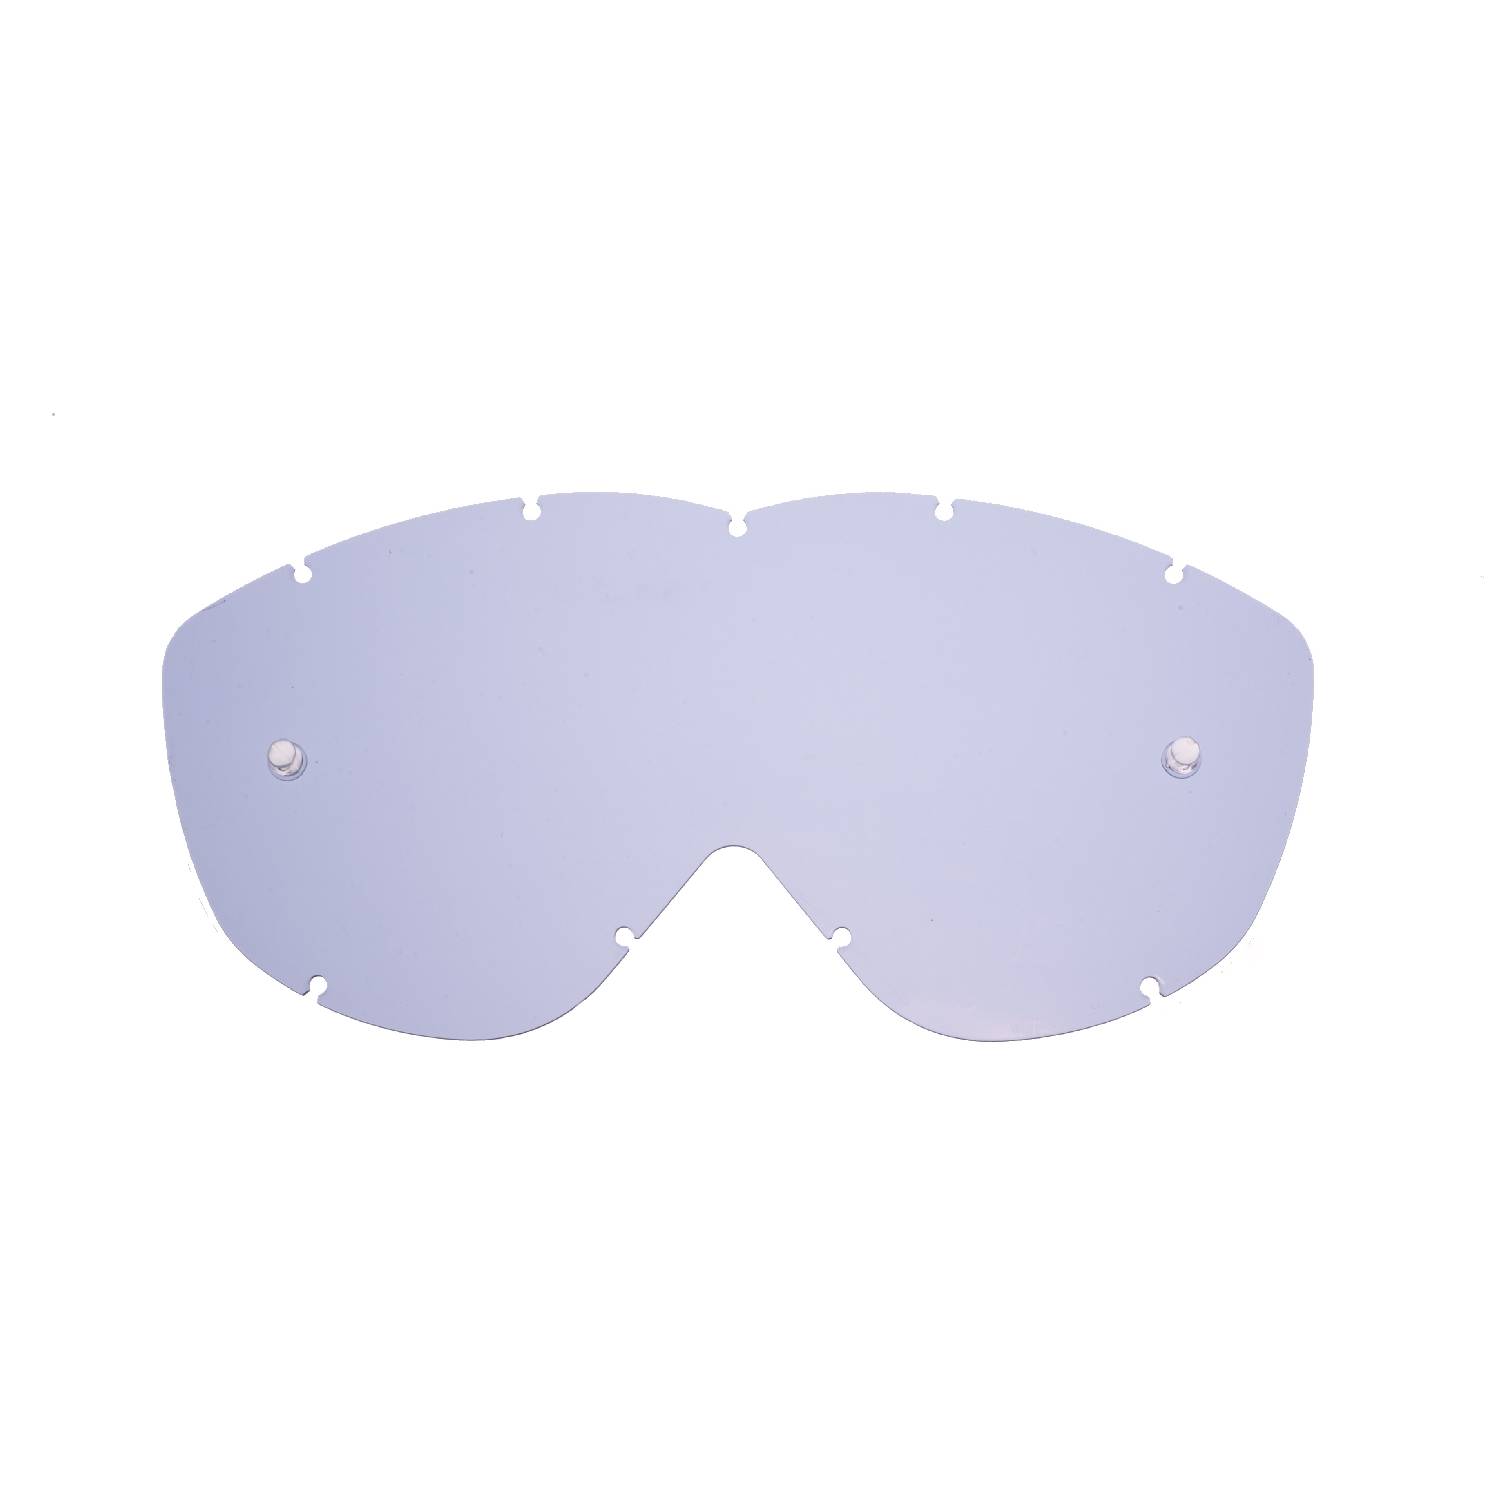 smokey replacement lenses for goggles compatible for Spy Alloy / Targa goggle